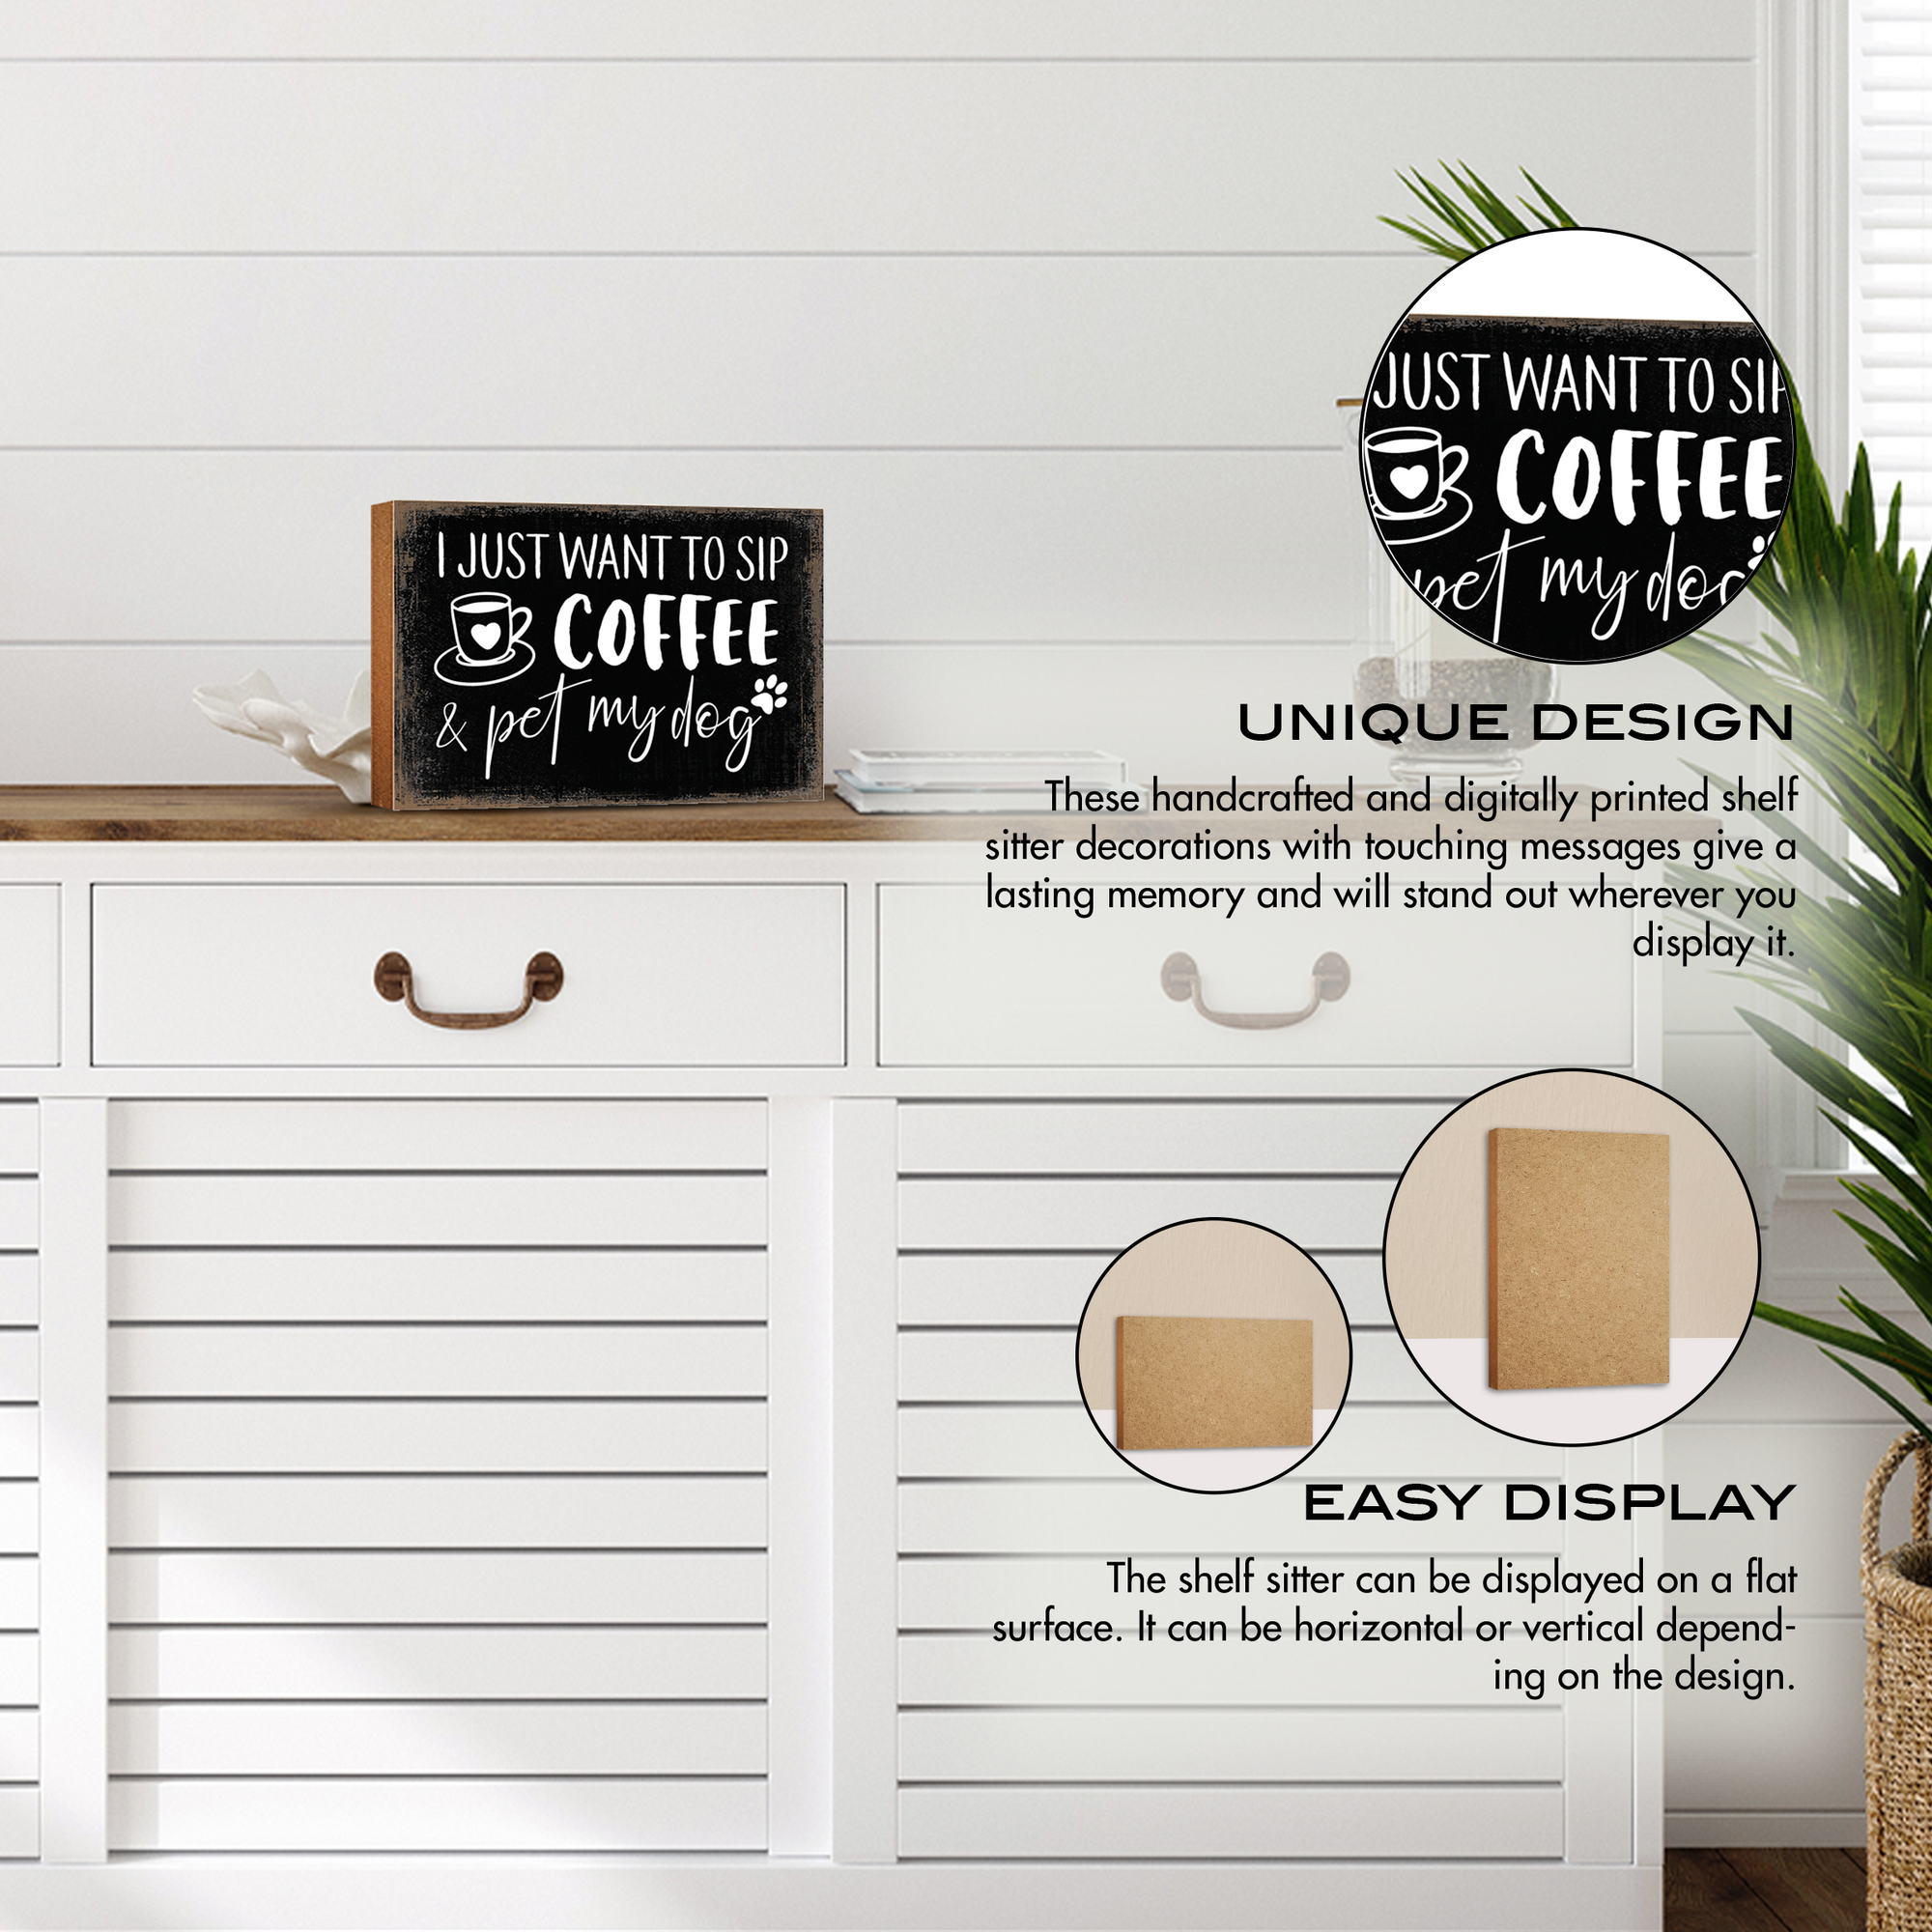 Wooden Shelf Decor and Tabletop Signs with Pet Verses - Sip Coffee